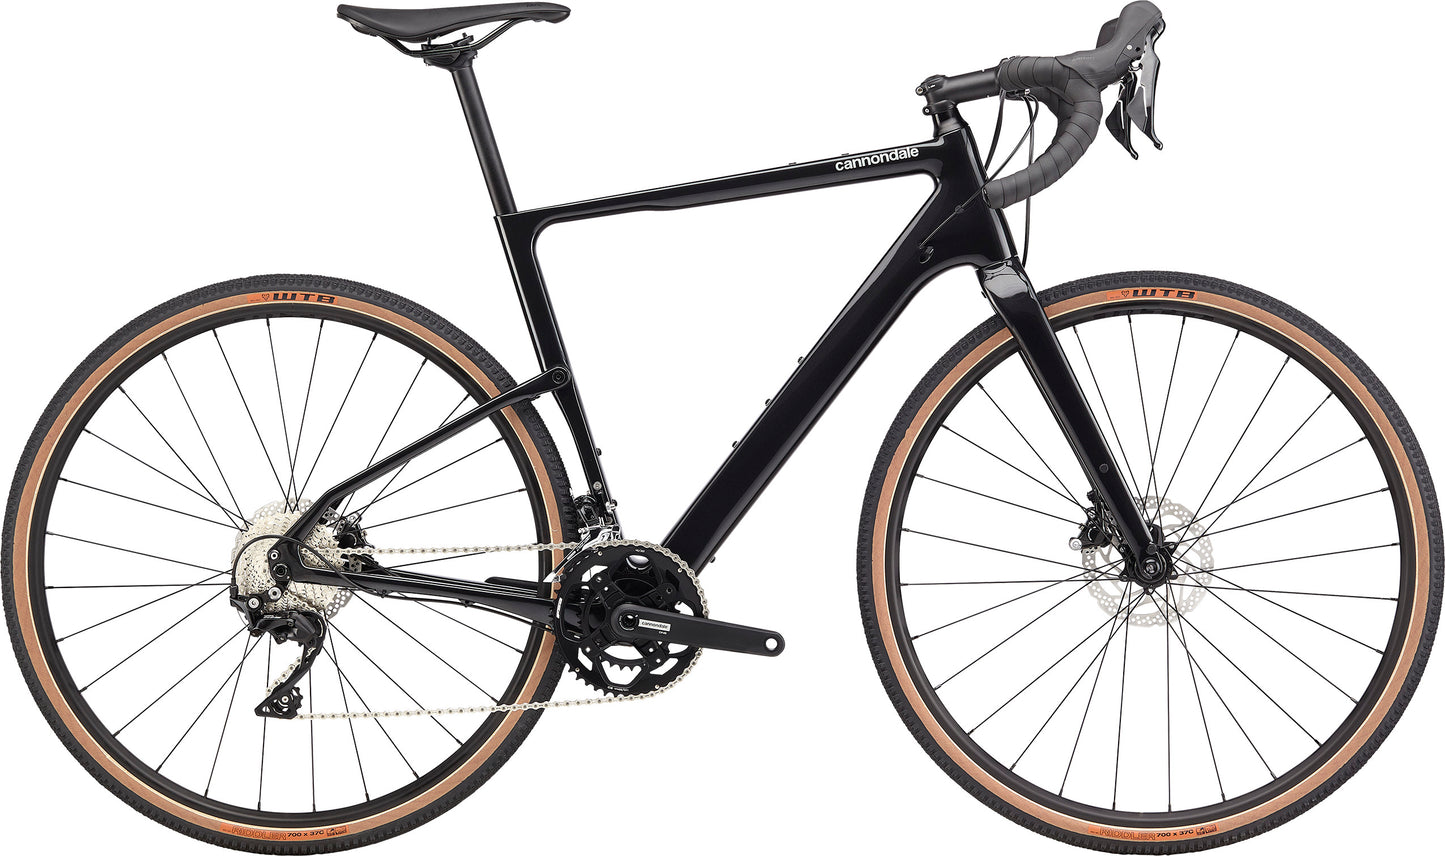 2021 Cannondale 700 M Topstone Crb 105